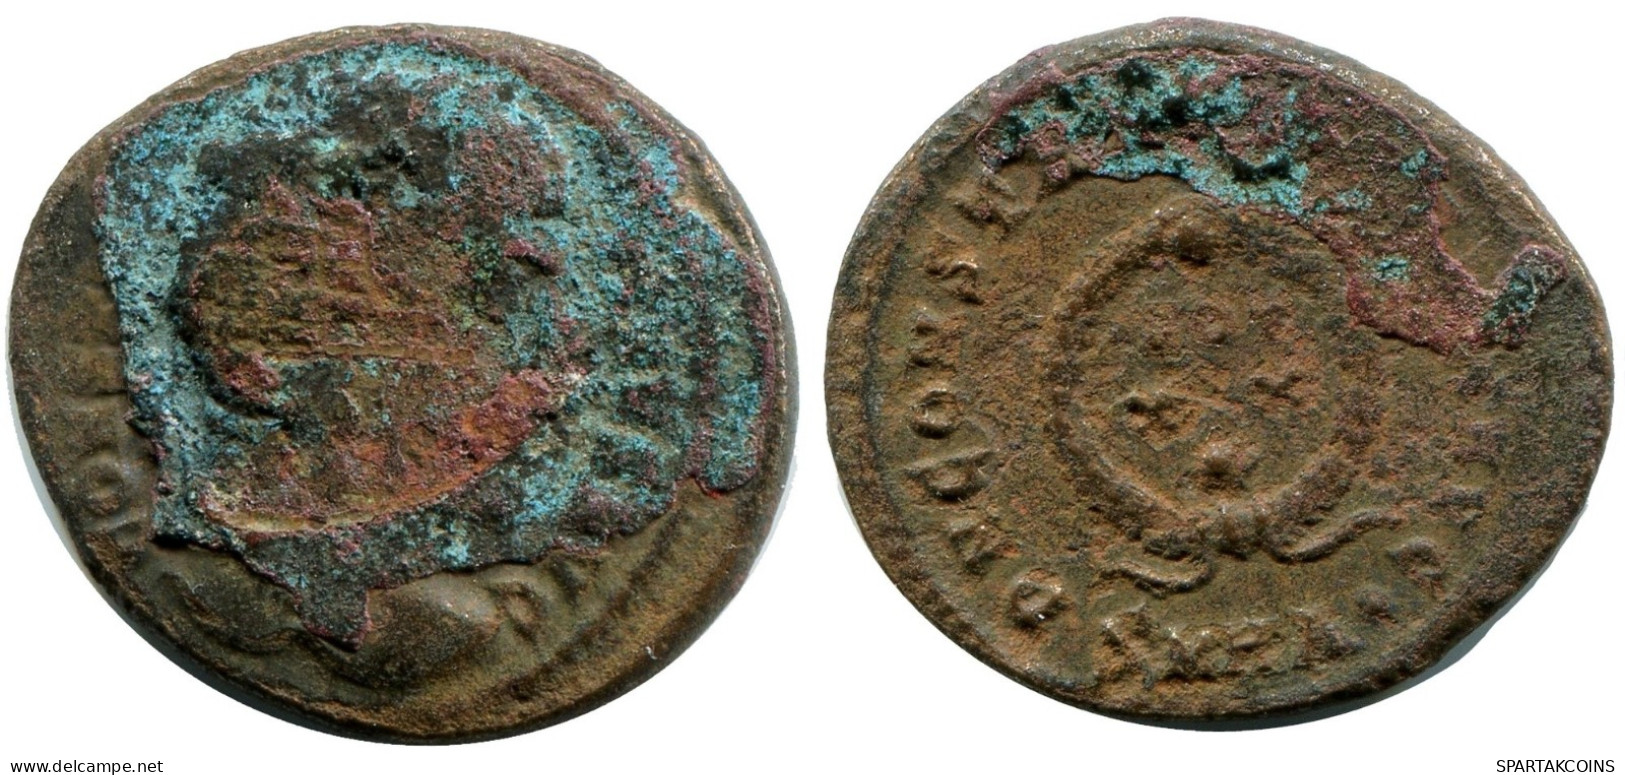 CONSTANTINE I MINTED IN HERACLEA FROM THE ROYAL ONTARIO MUSEUM #ANC11202.14.U.A - El Impero Christiano (307 / 363)